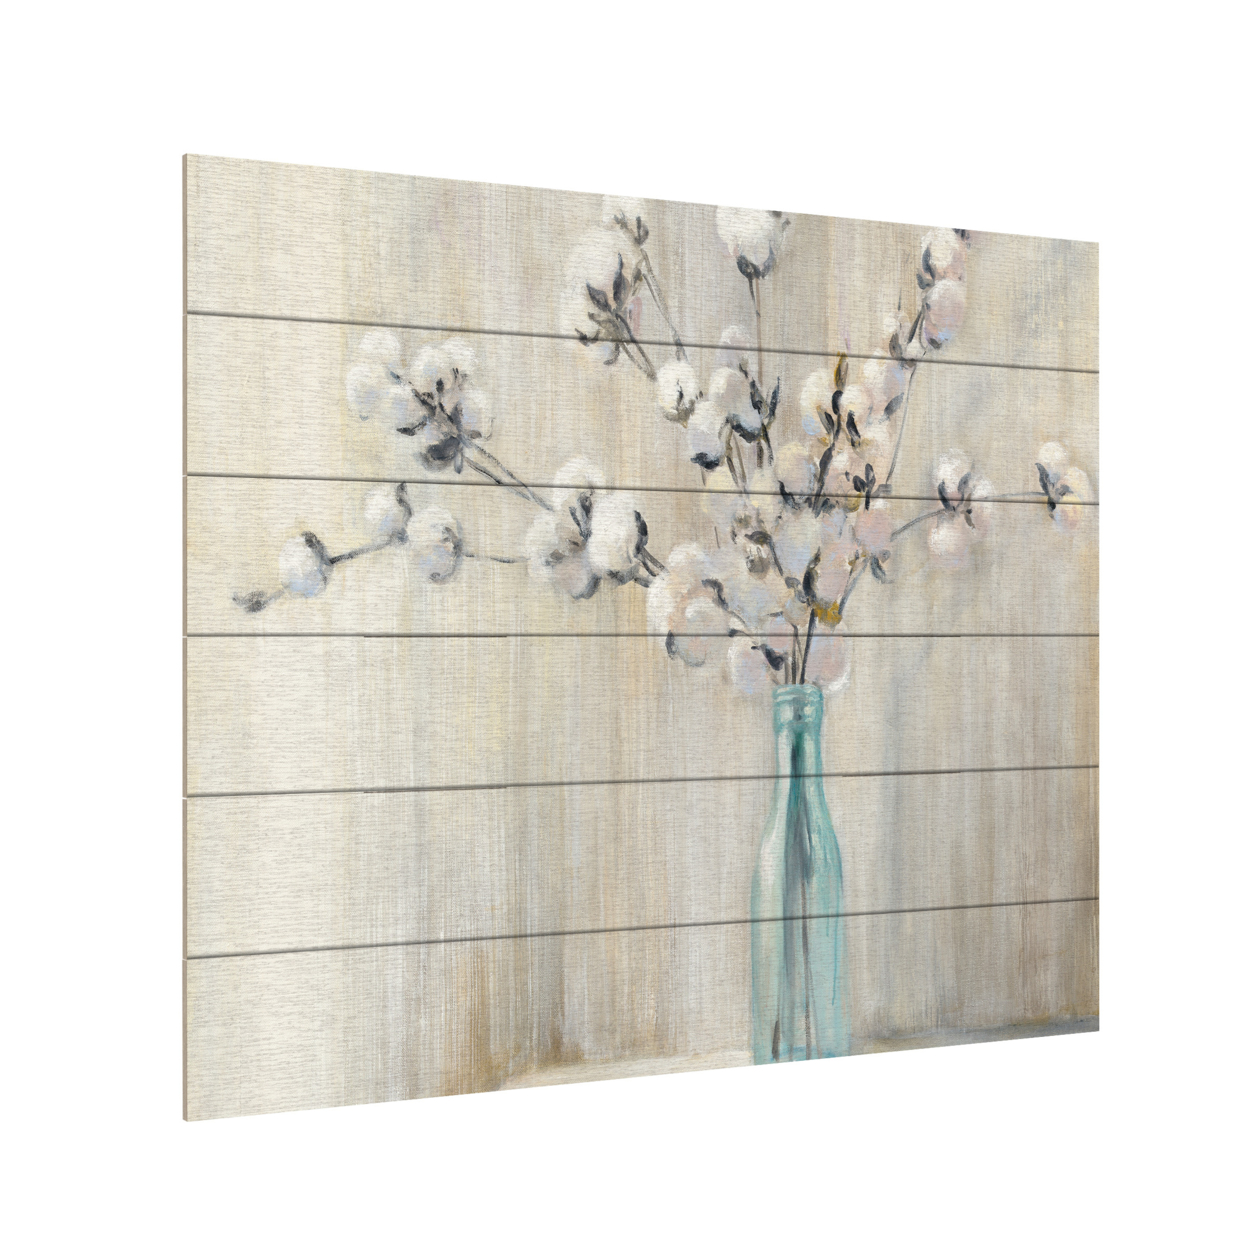 Wooden Slat Art 18 X 22 Inches Titled Cotton Bouquet Crop Ready To Hang Home Decor Picture